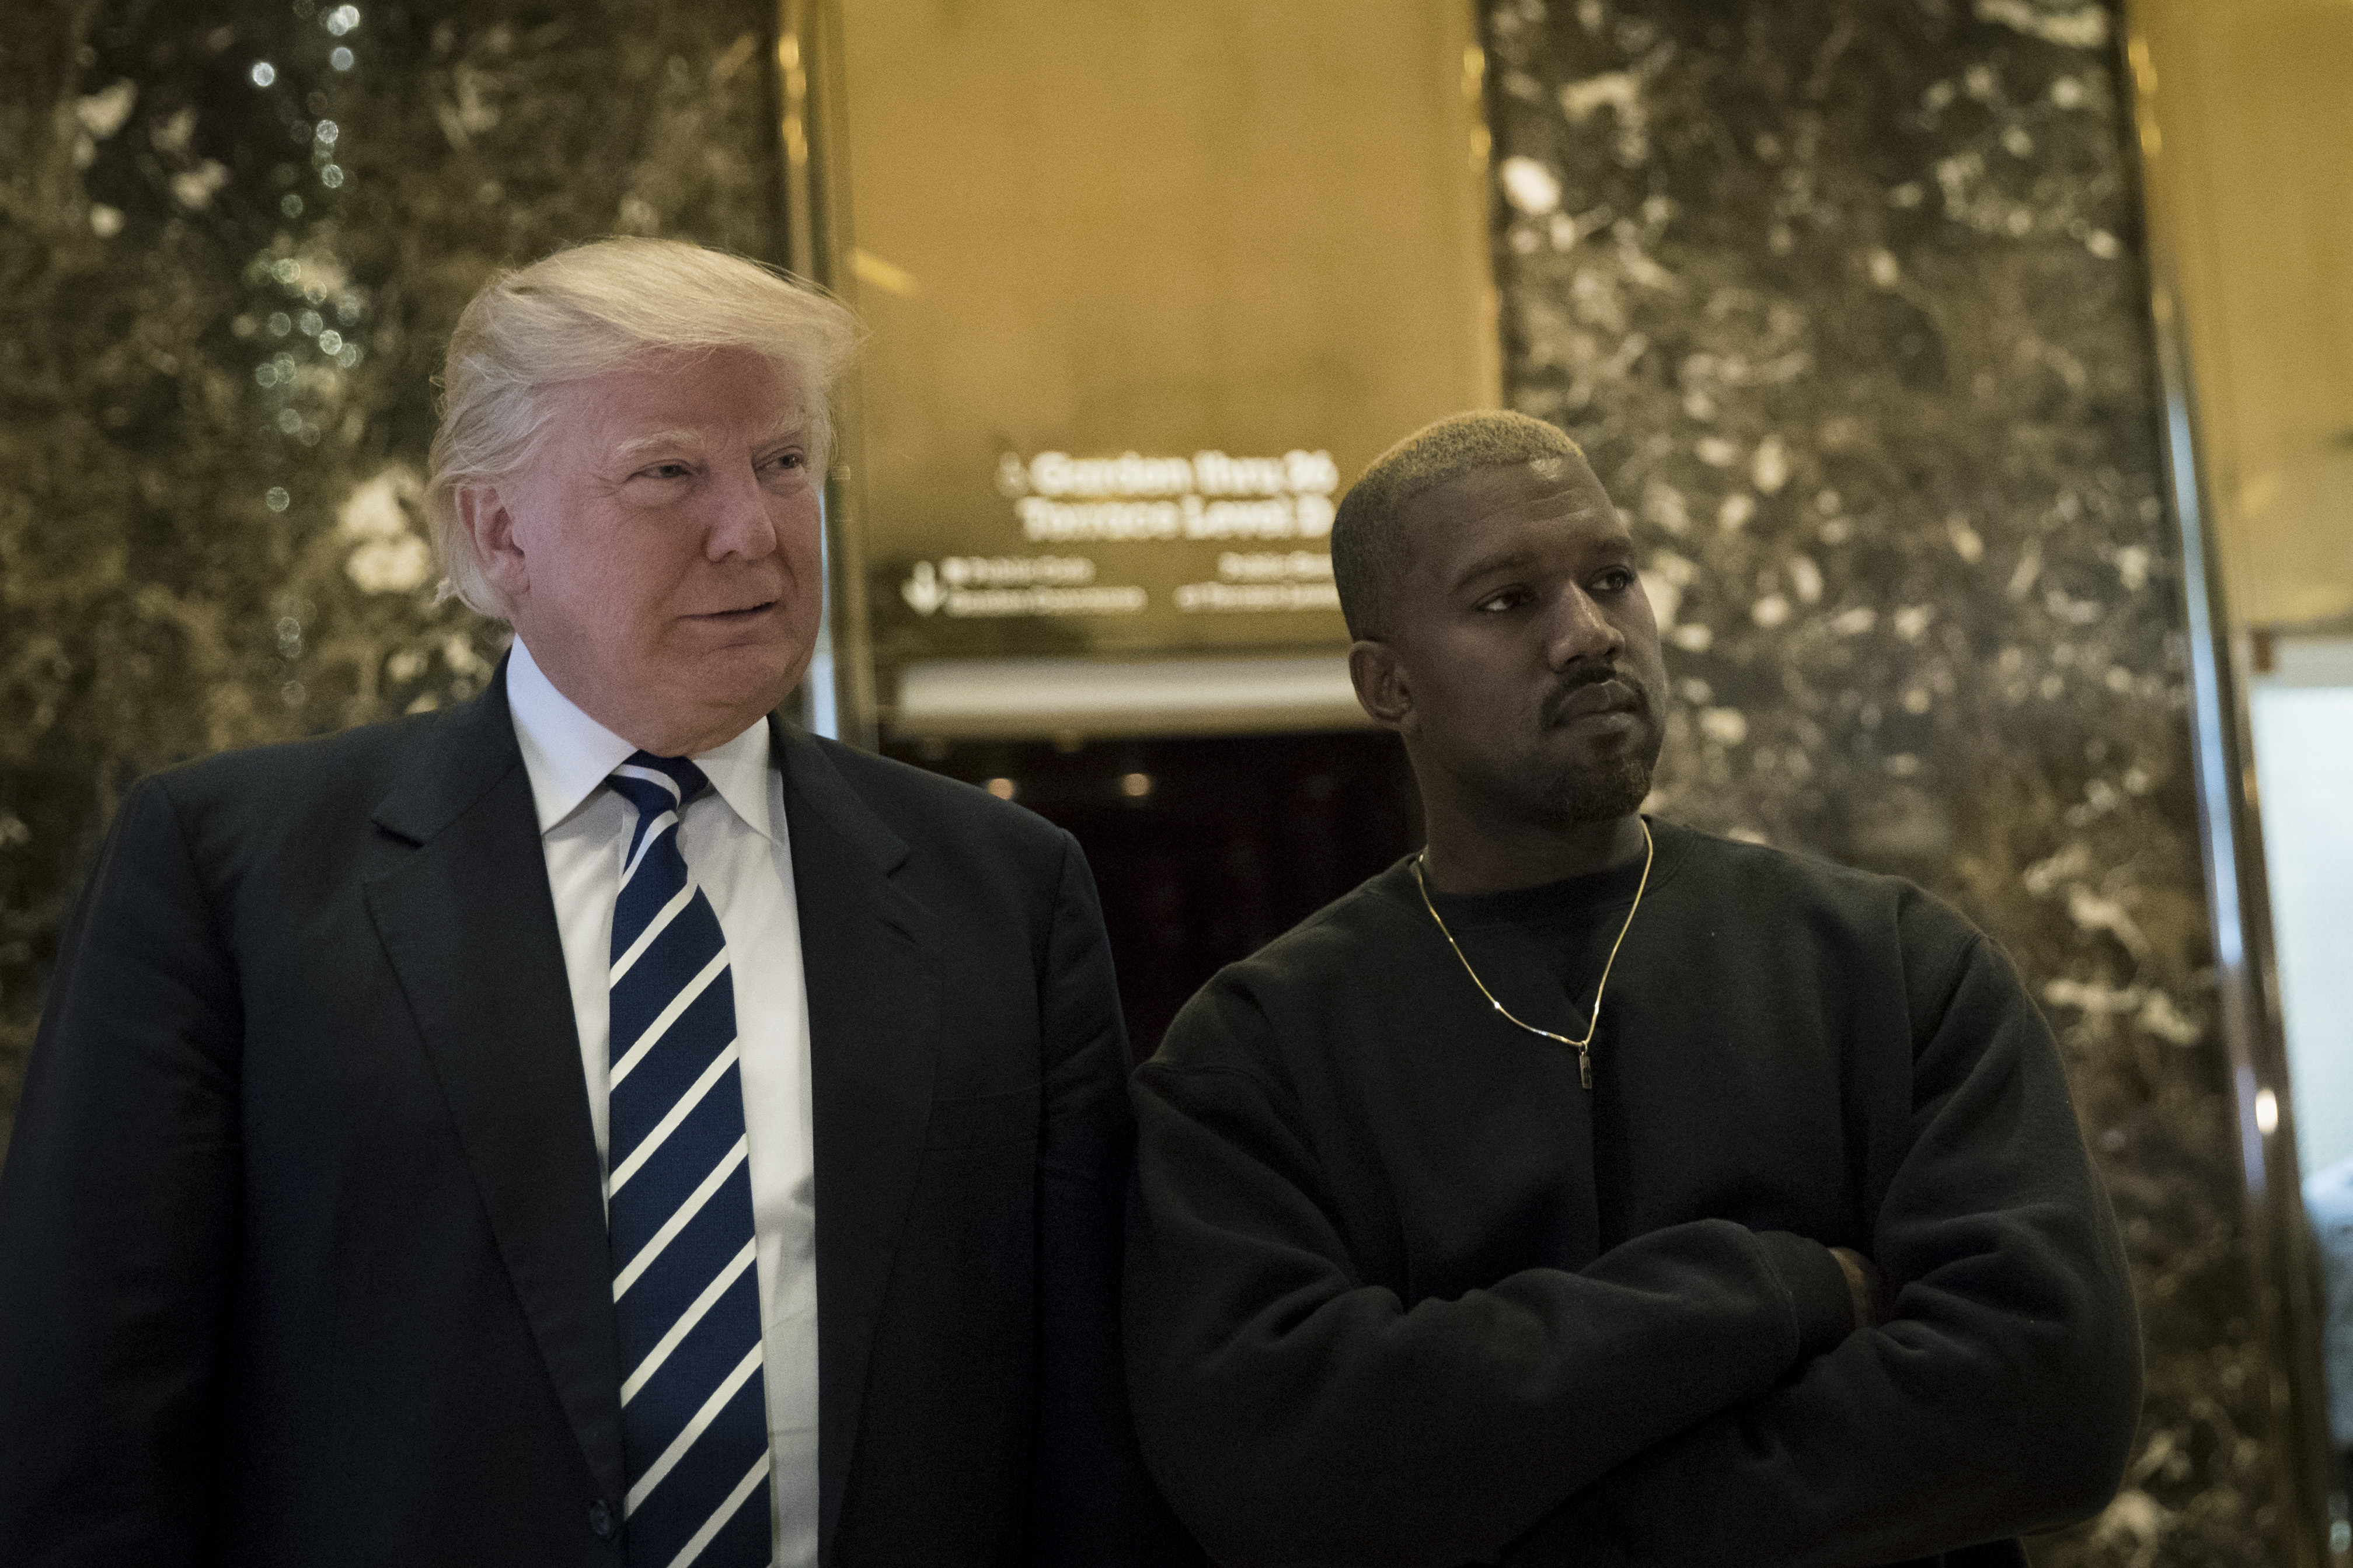 NEW YORK, NY - DECEMBER 13: (L to R) President-elect Donald Trump and Kanye West stand together in the lobby at Trump Tower, December 13, 2016 in New York City. President-elect Donald Trump and his transition team are in the process of filling cabinet and other high level positions for the new administration.   Drew Angerer/Getty Images/AFP